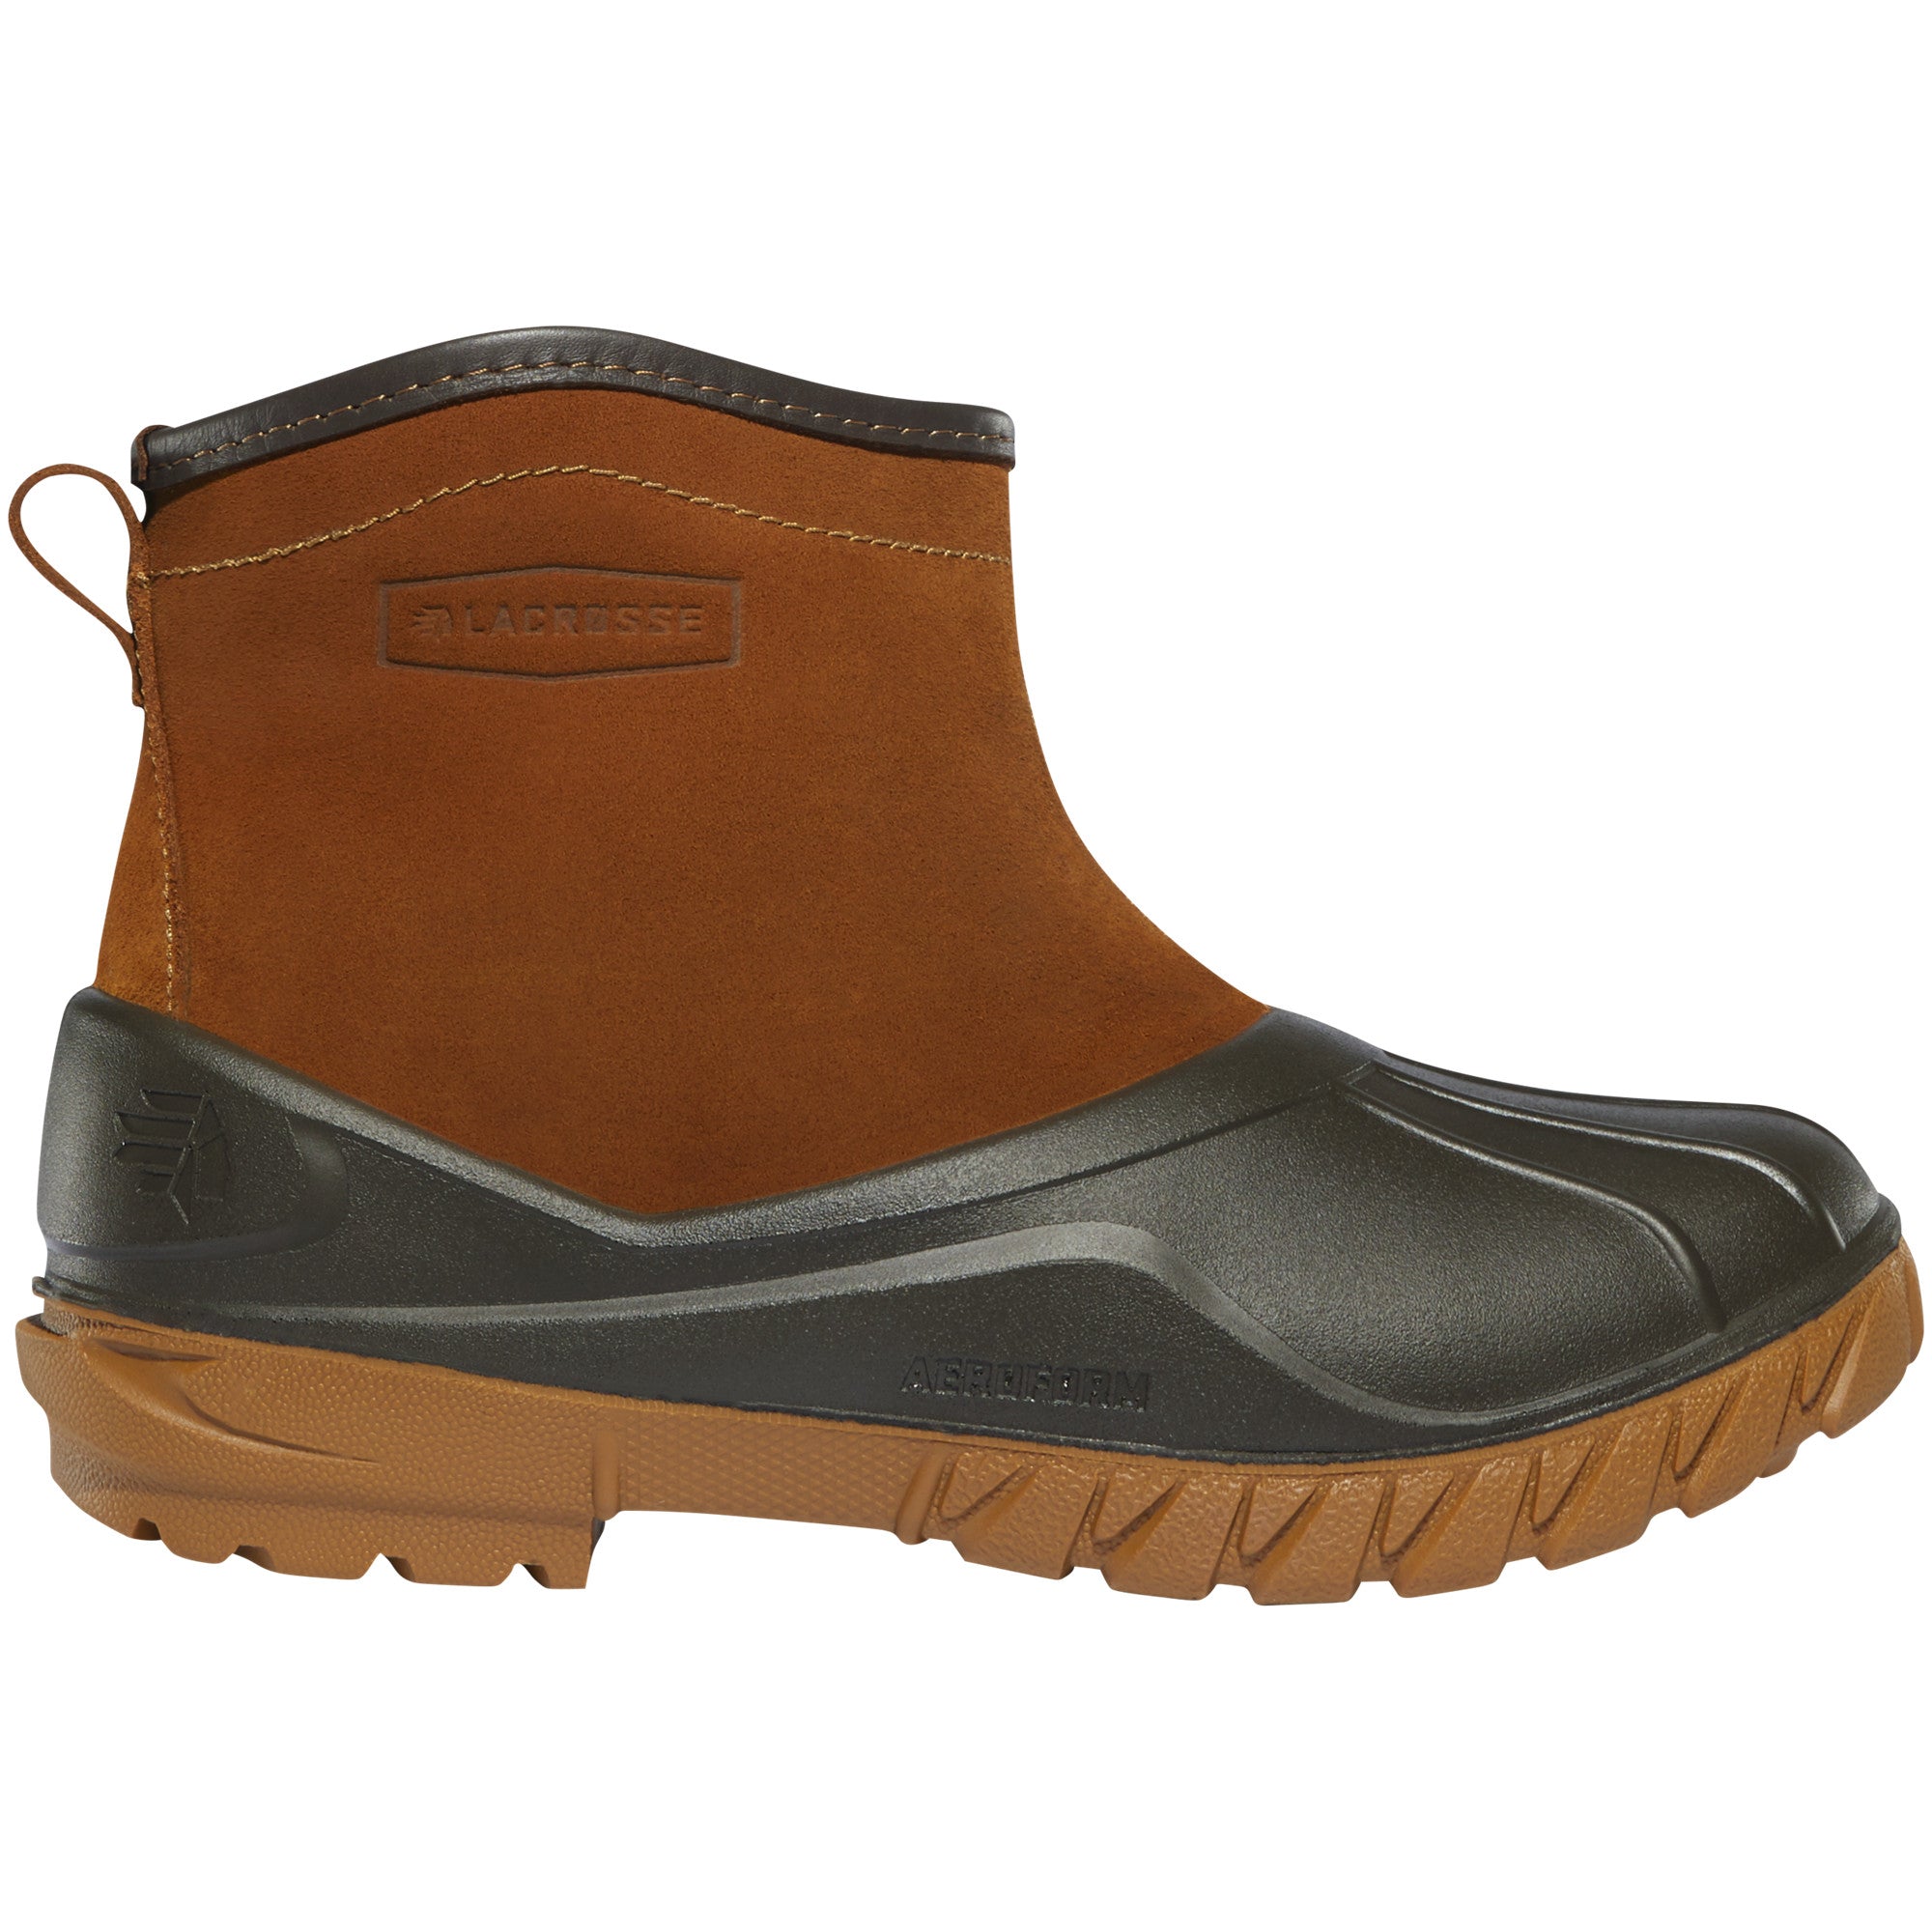 LaCrosse Women's Aero Timber Top Slip-On 5" Waterproof Outdoor Boot in Clay Brown from the side